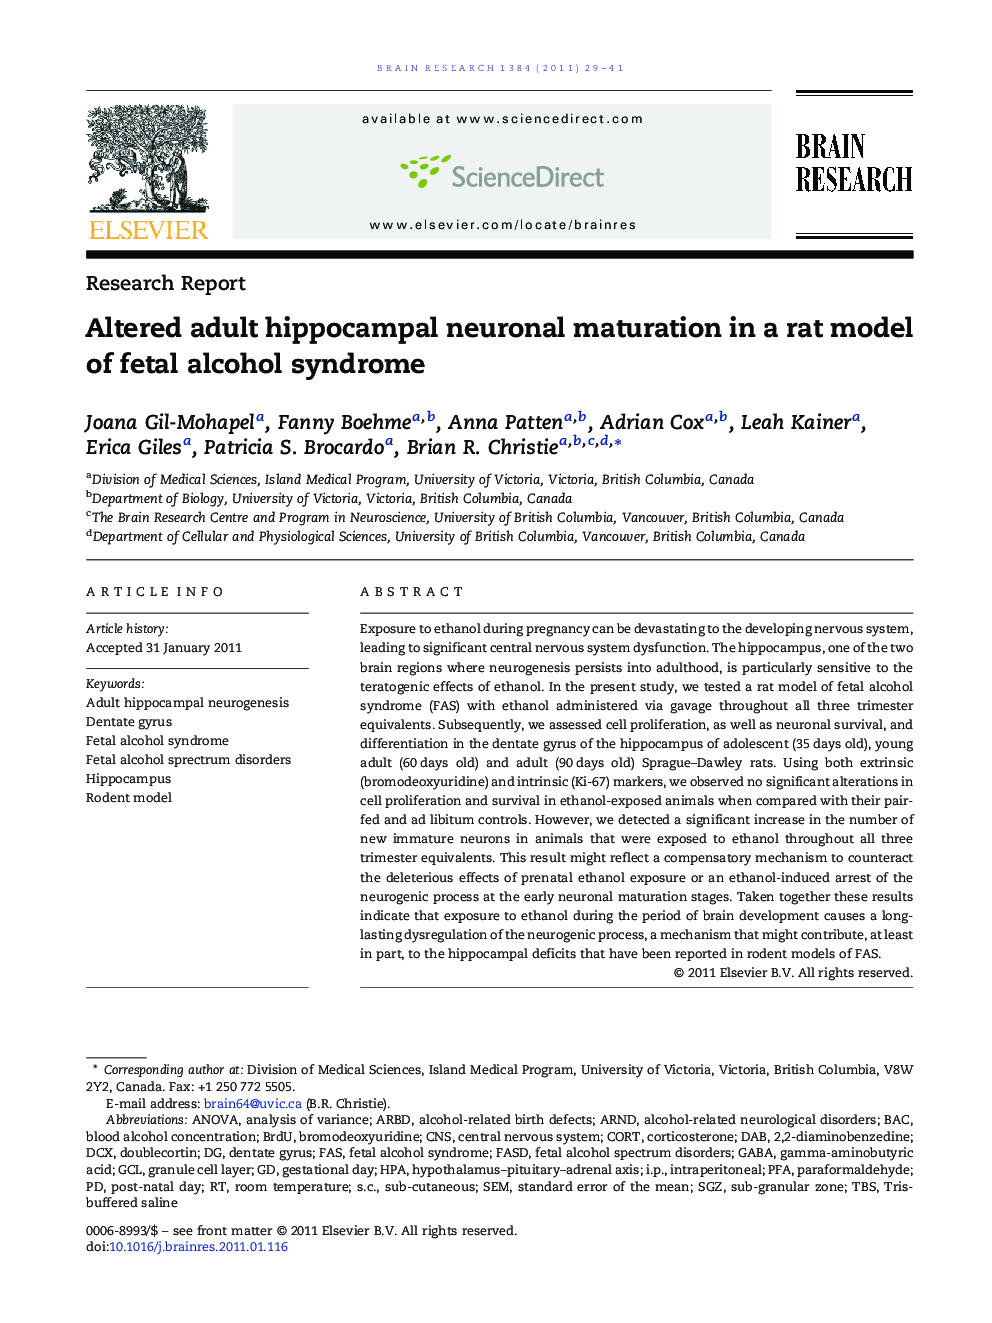 Research ReportAltered adult hippocampal neuronal maturation in a rat model of fetal alcohol syndrome